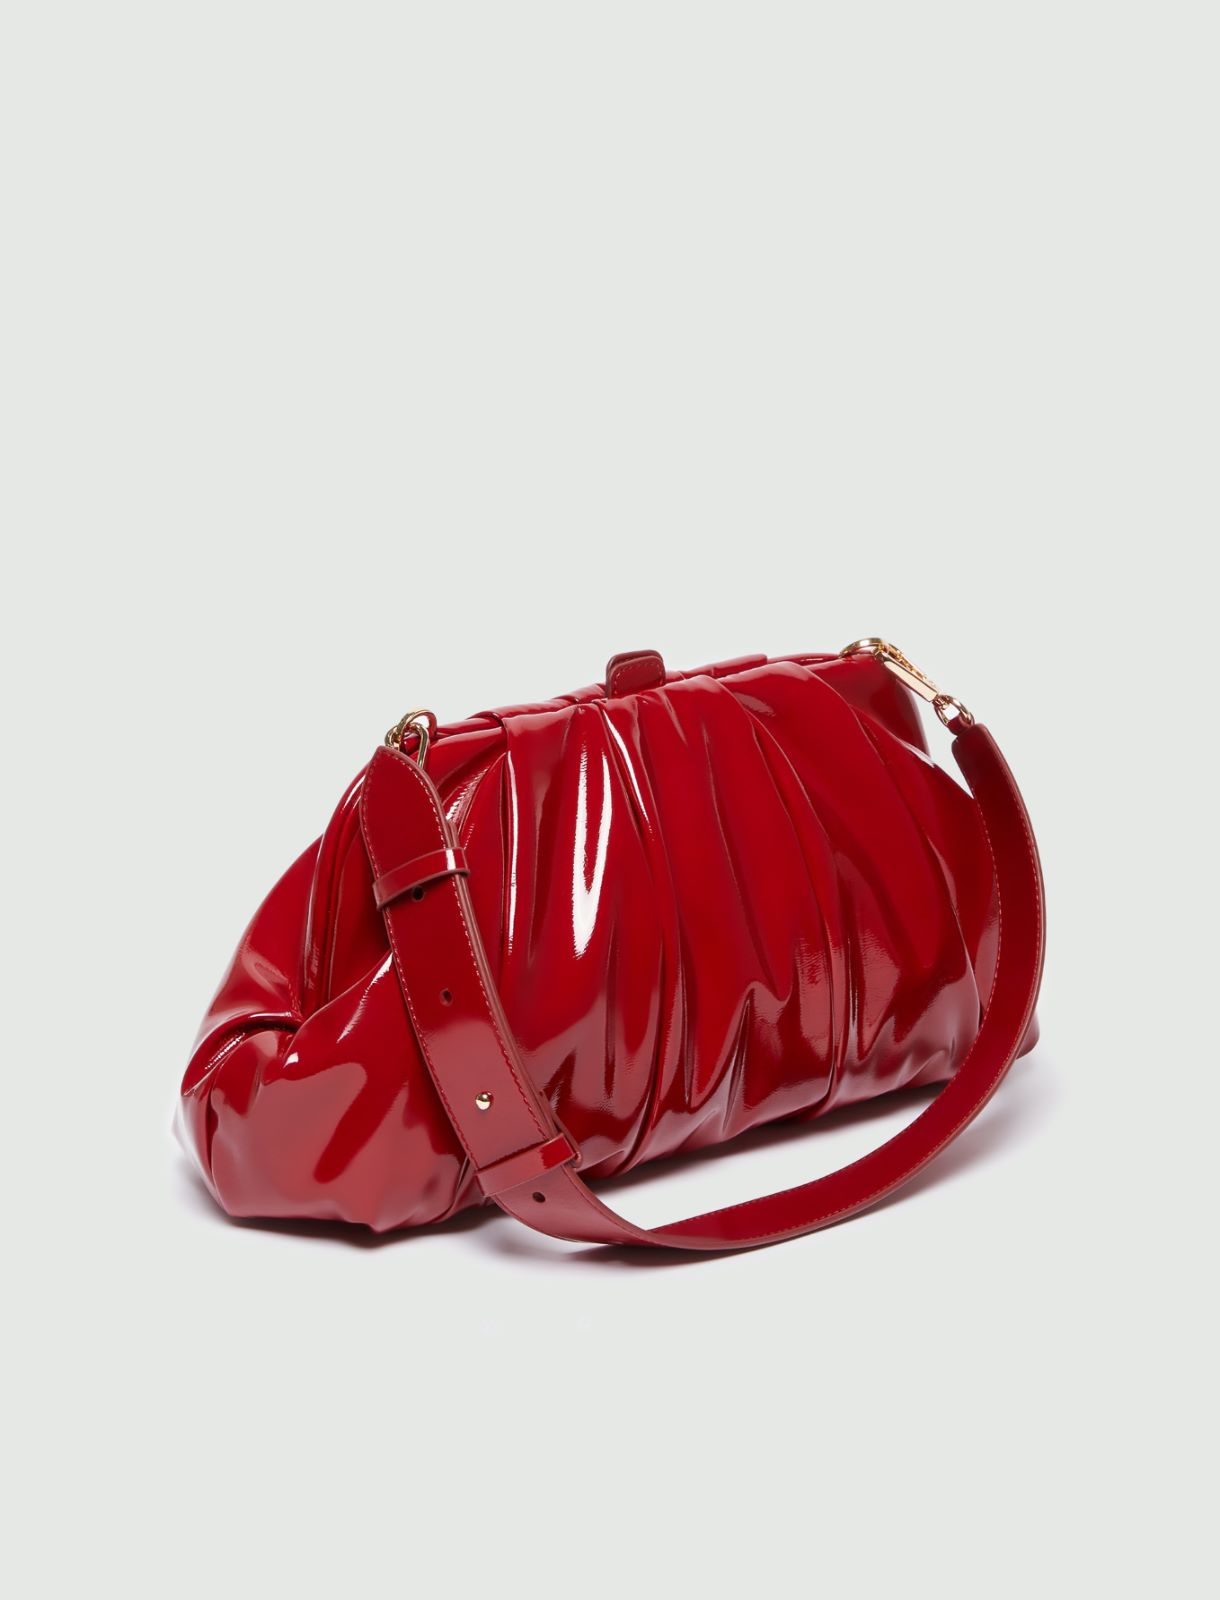 Patent leather bag - Red - Marella - 2